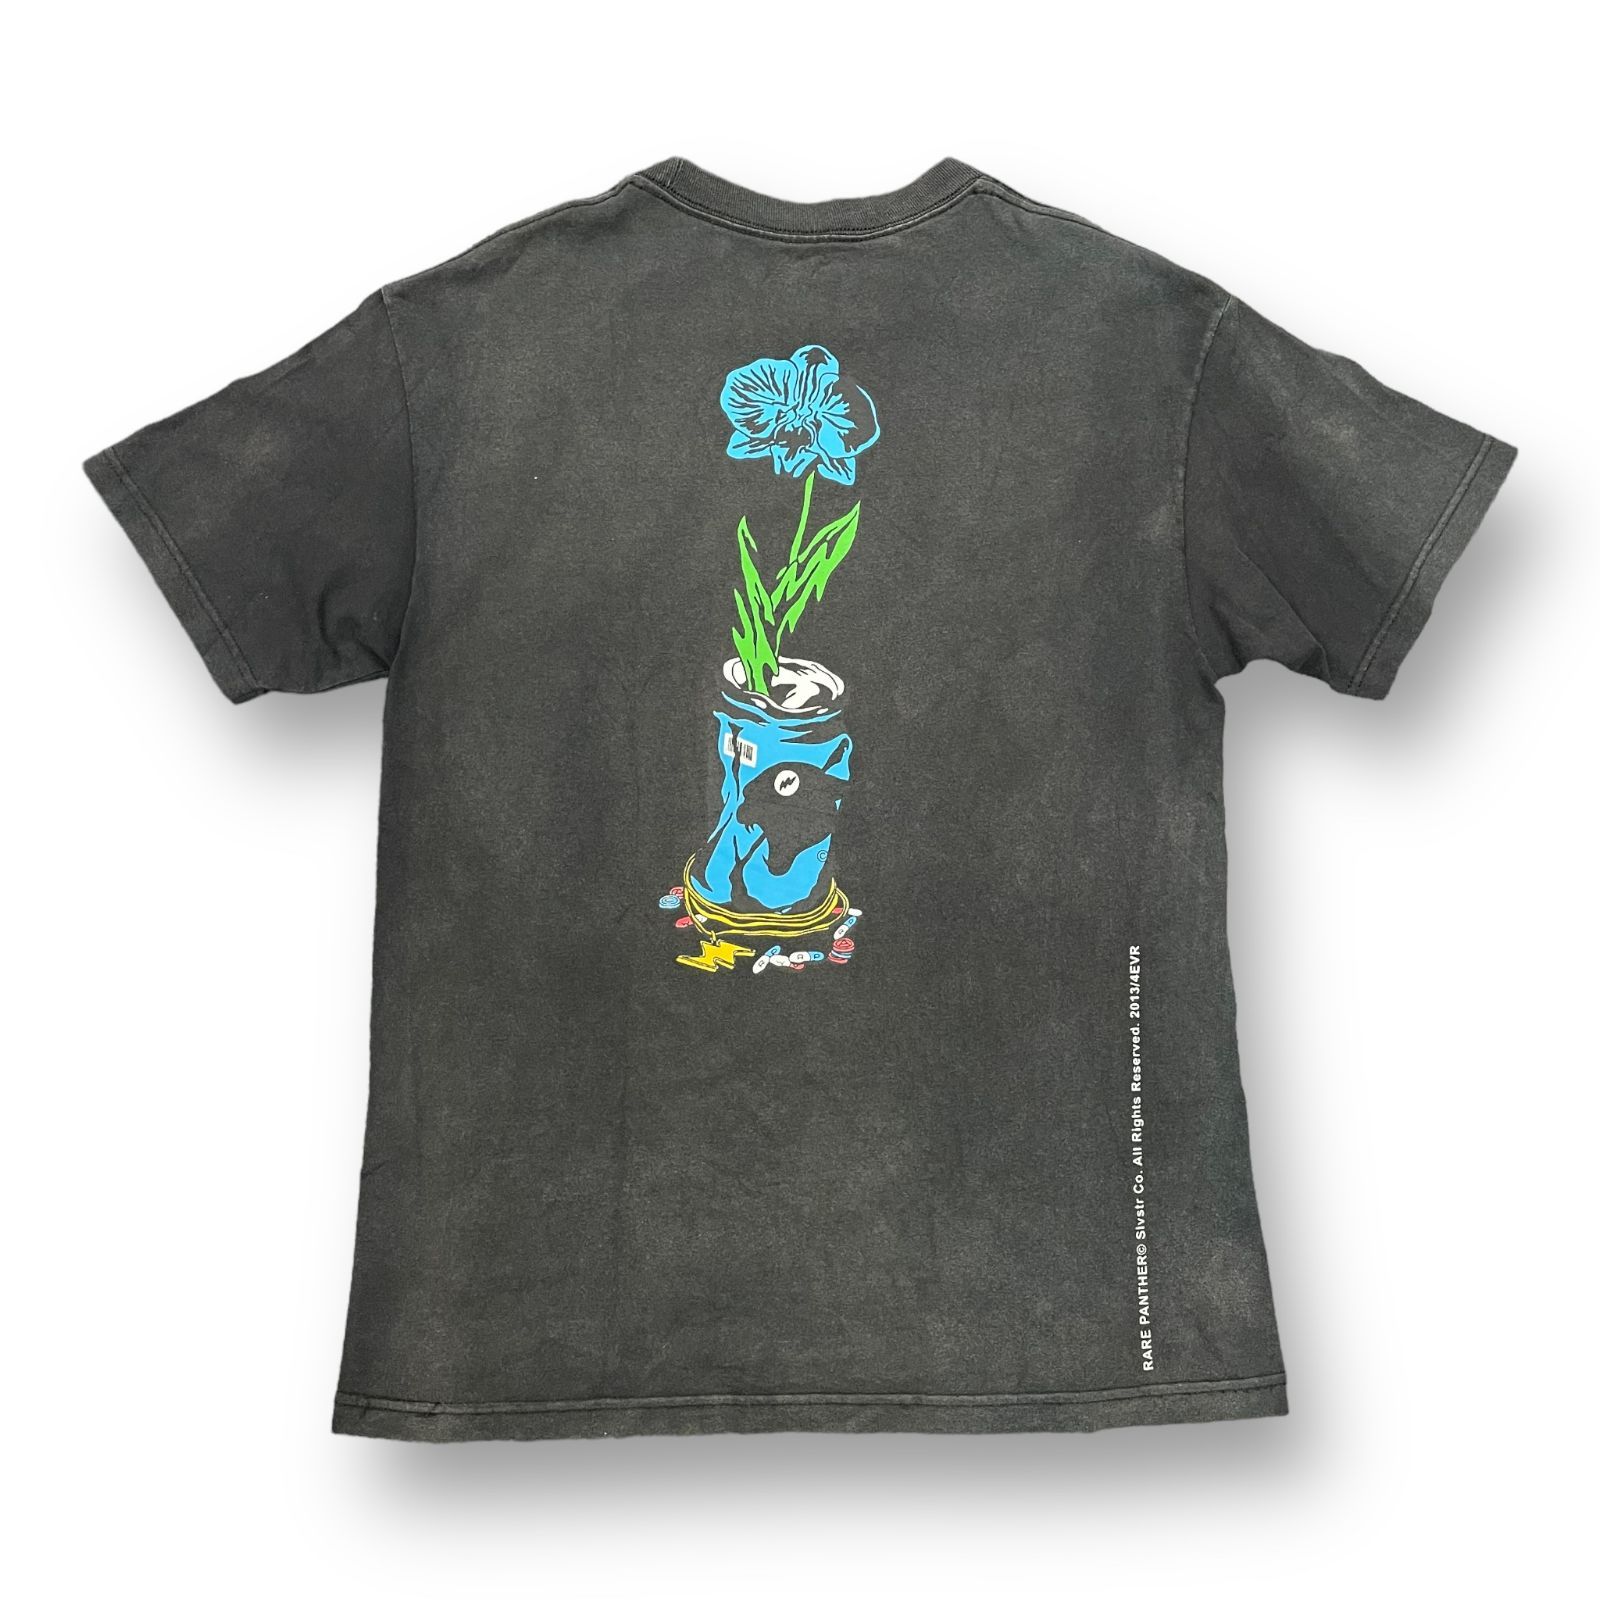 WASTED YOUTH RARE PANTHER コラボ プリント クルーネック Tシャツ ...